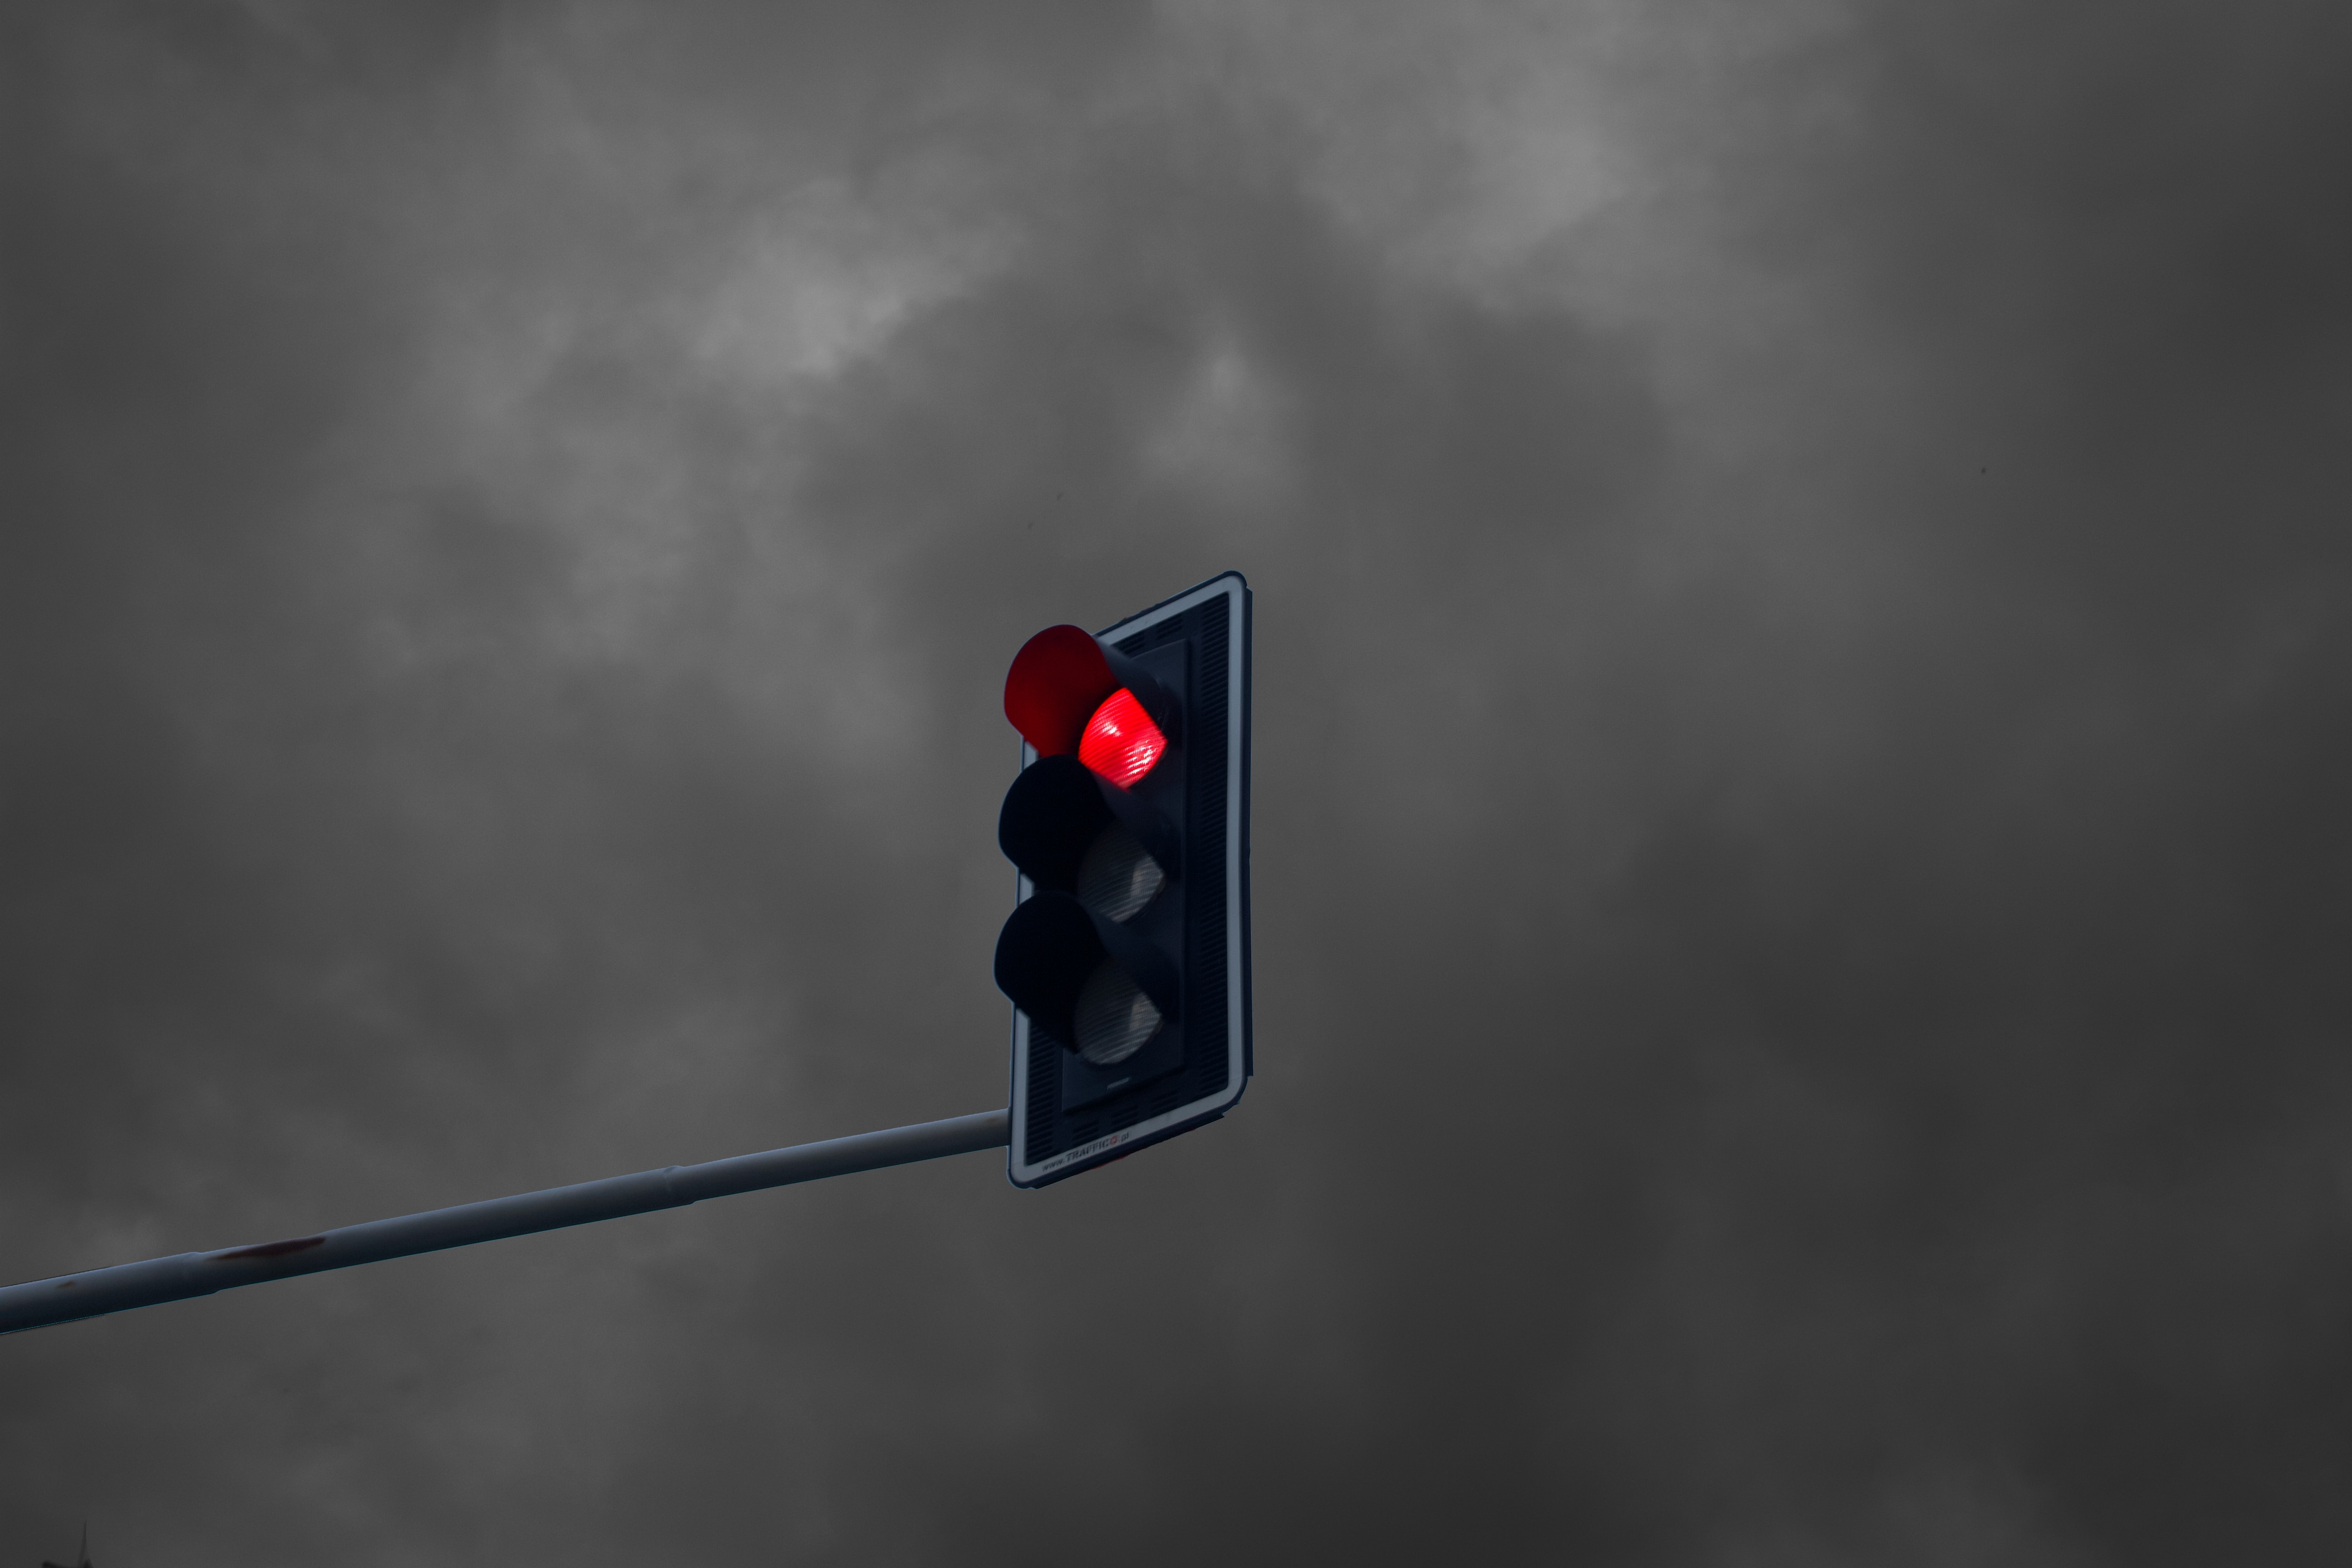 traffic light, clouds, red, miscellanea, miscellaneous, glow 32K